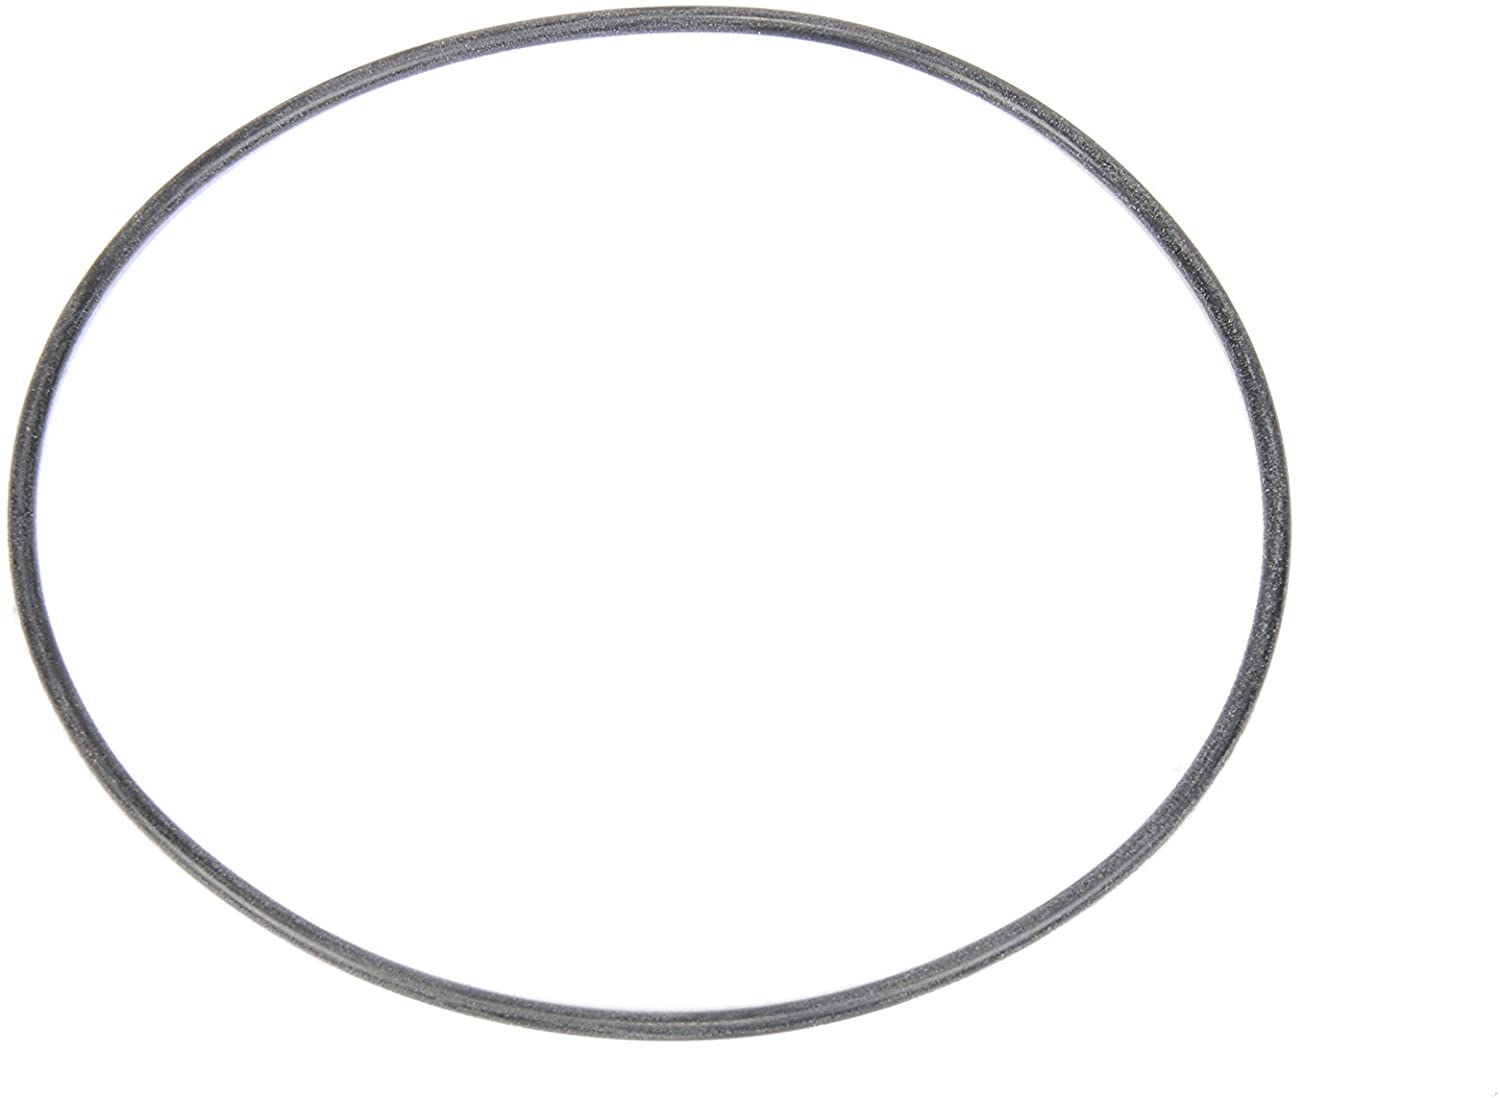 ACDelco 88971652 GM Original Equipment Automatic Transmission Low and Reverse Clutch Piston Intermediate Seal